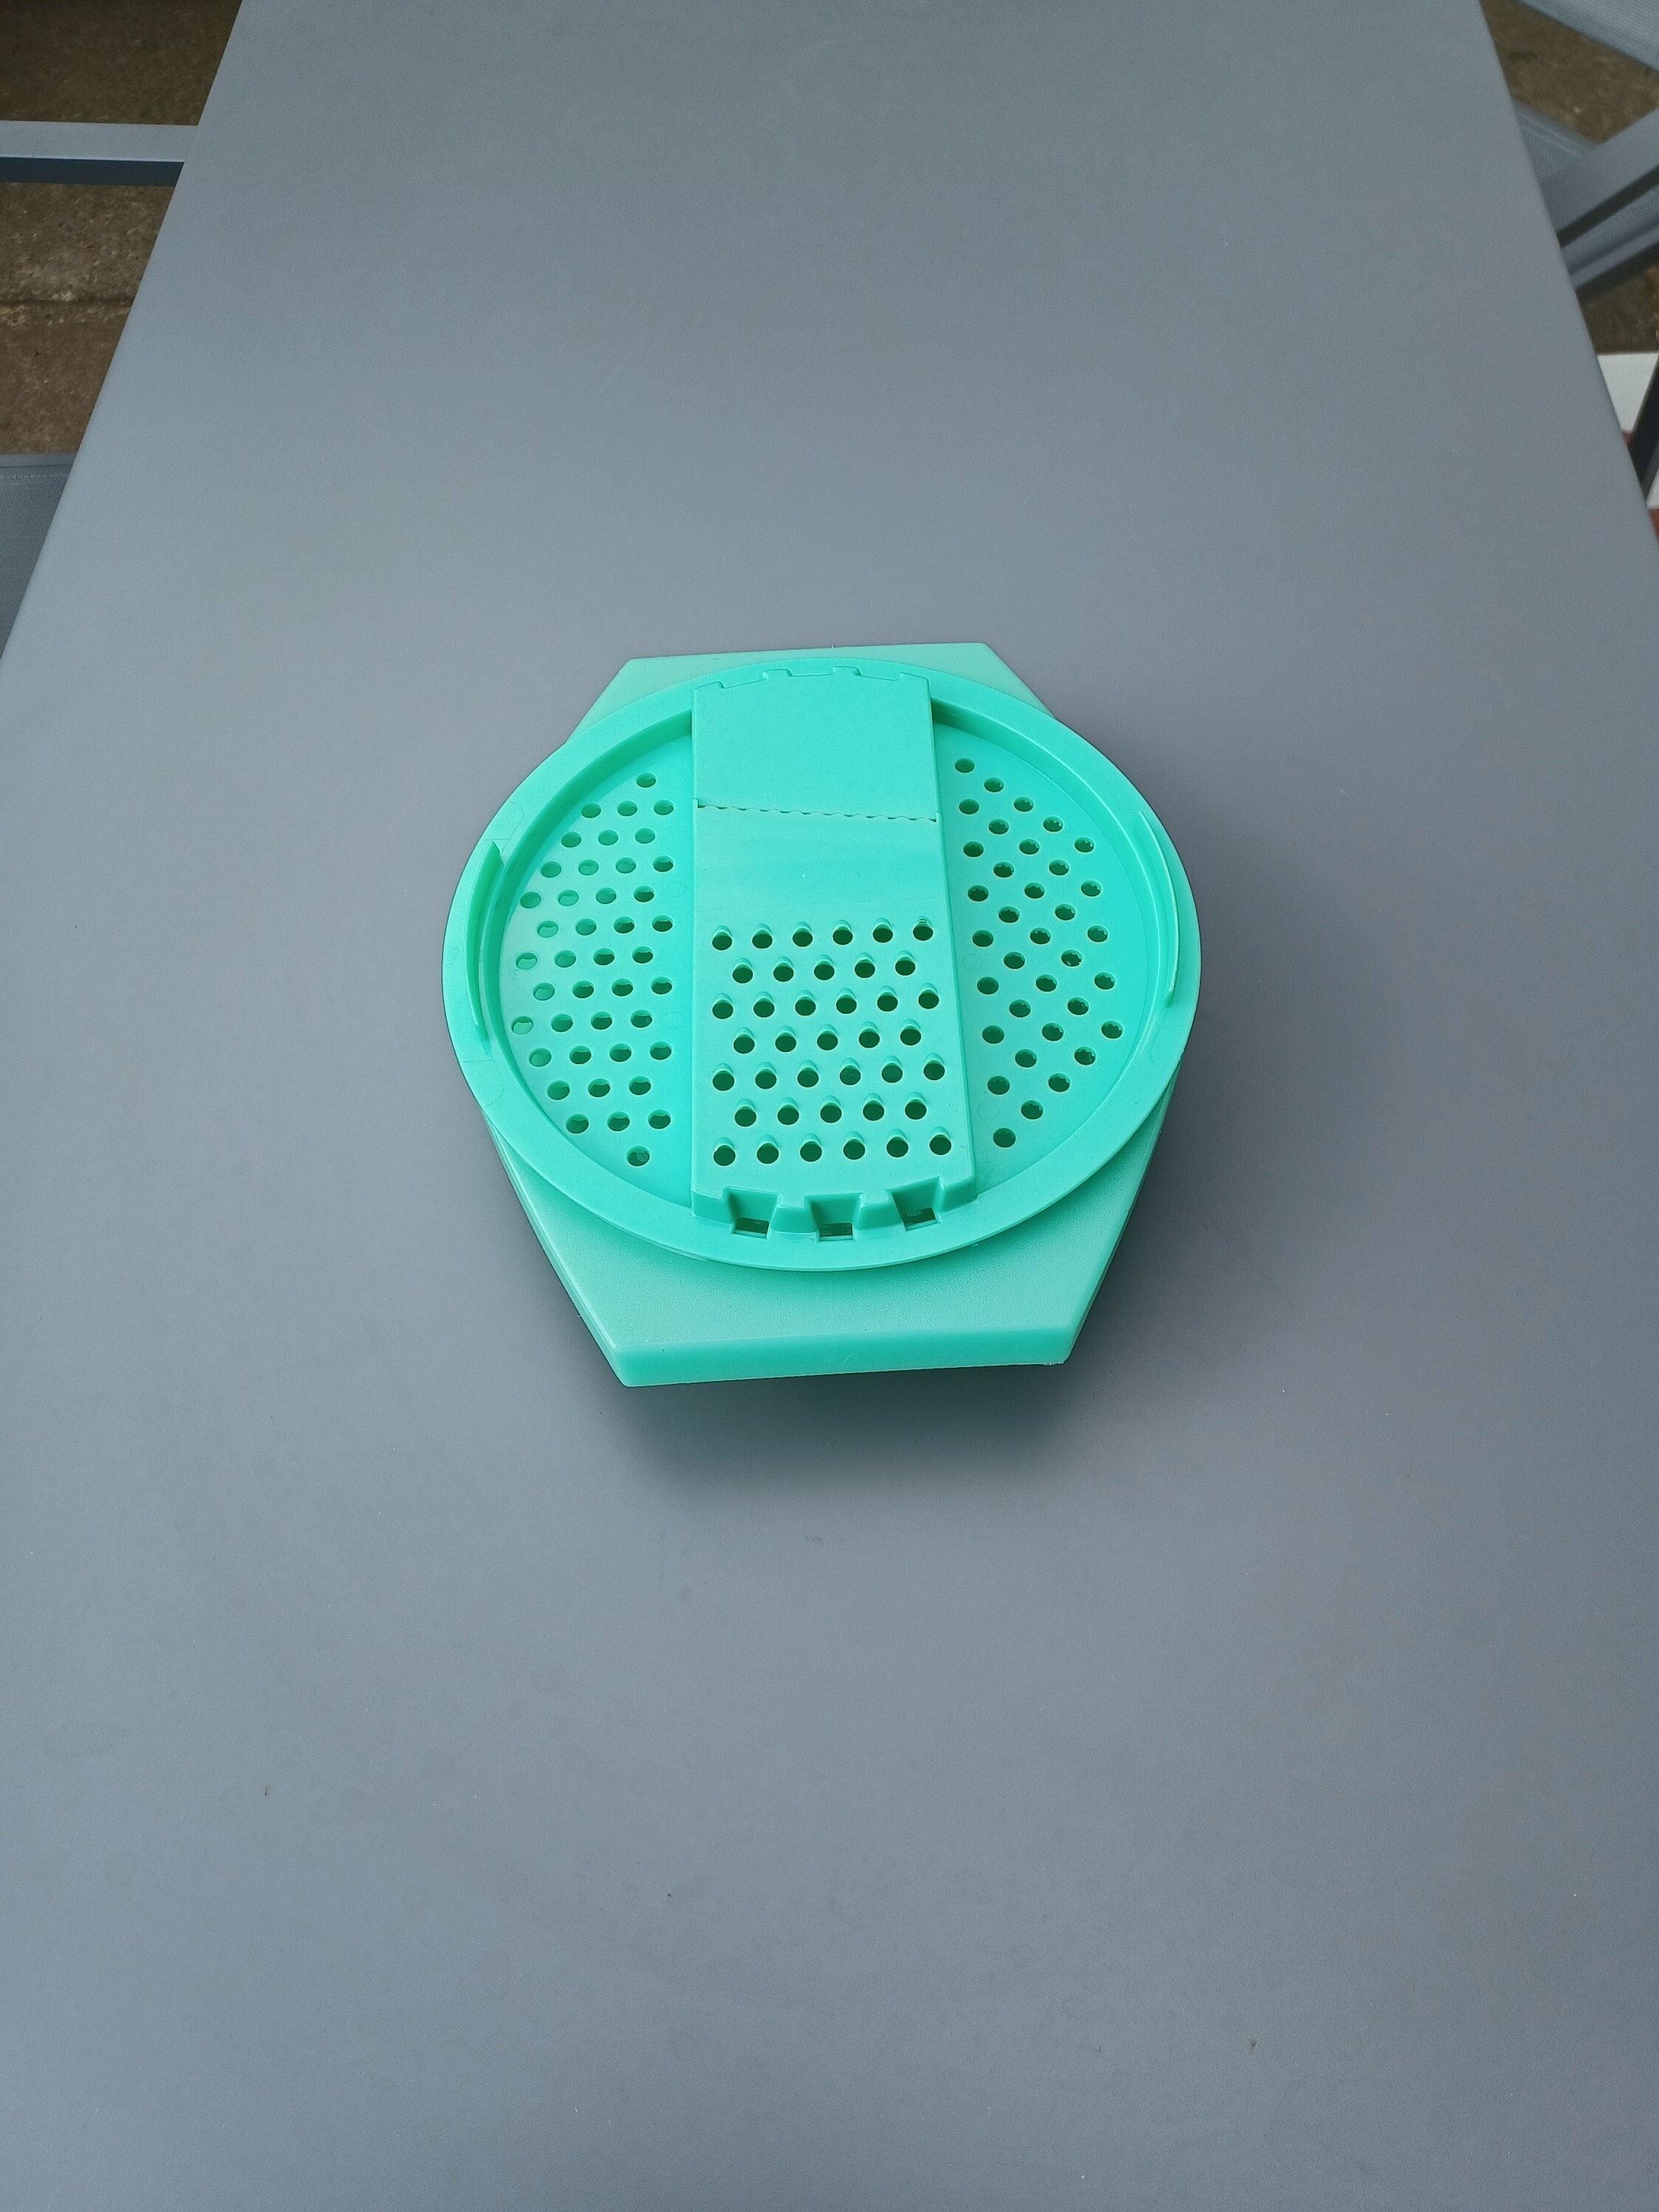 Vintage Tupperware Grater/Slicer bowl AND Cheese Grater - Jadeite Green